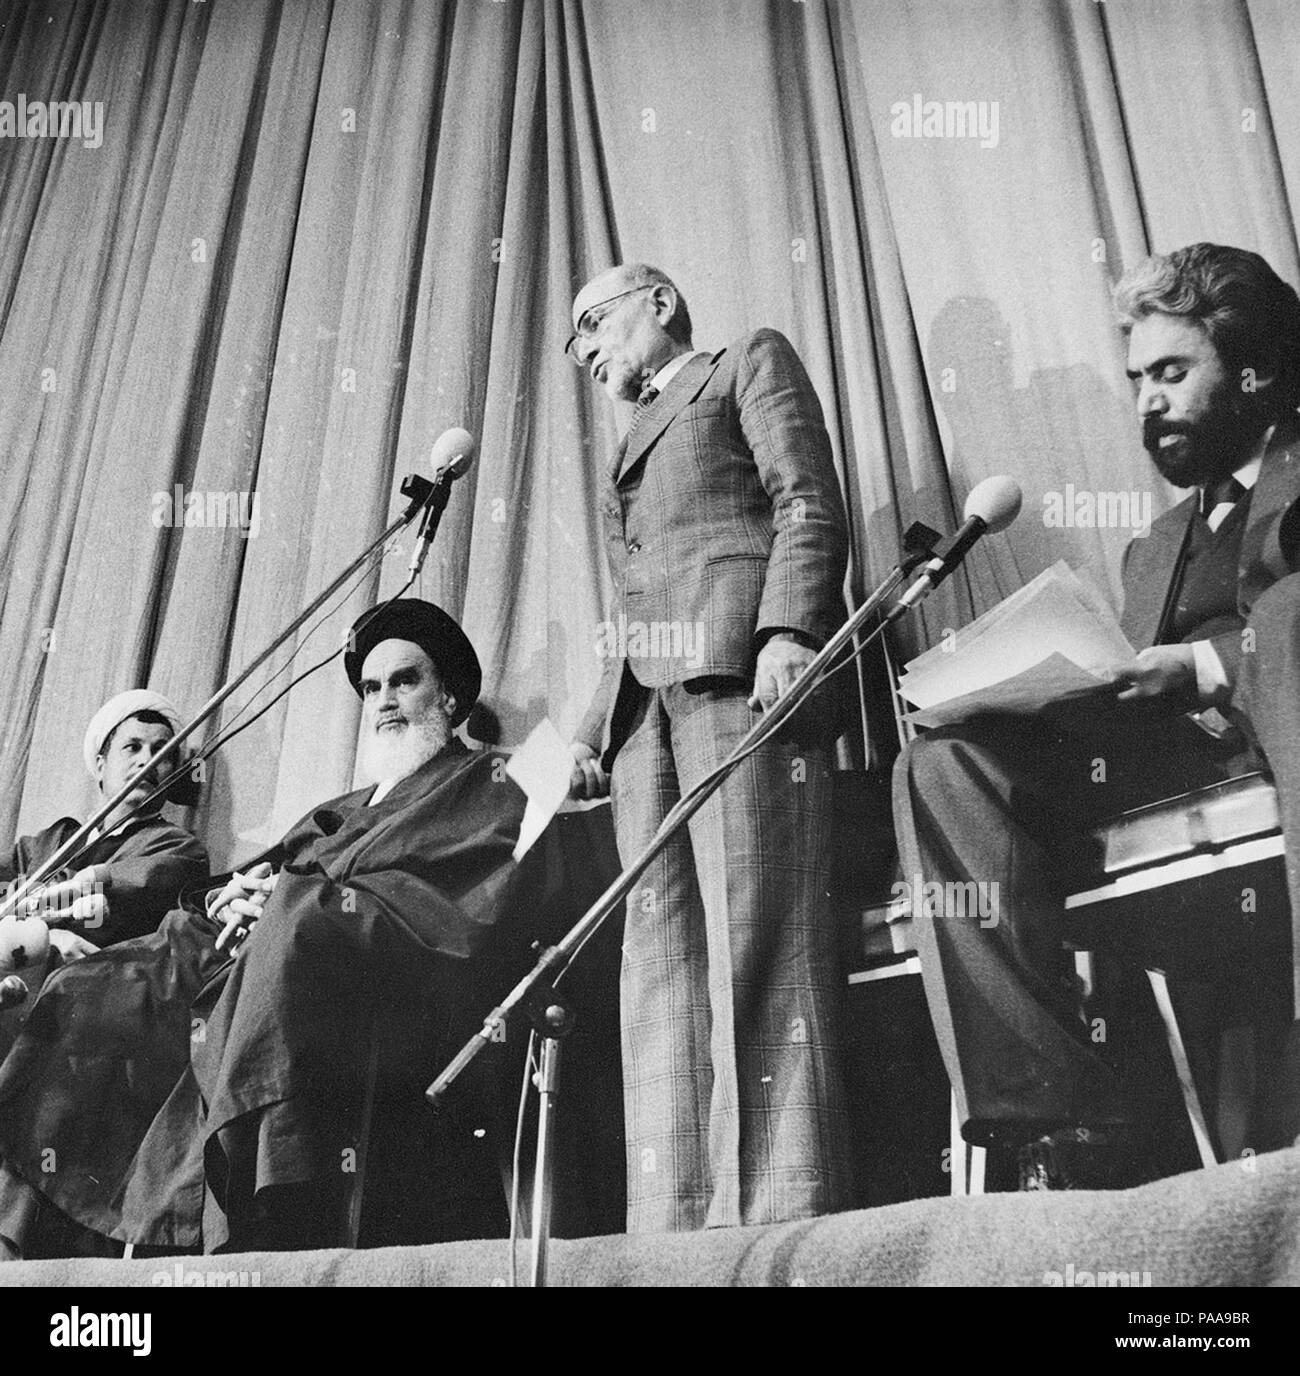 171 Mehdi Bazargan Inauguration, appointed prime minister of Iran by Khomeini, in the hall of Alavi Madrasa - 4 February 1979 (2) Stock Photo